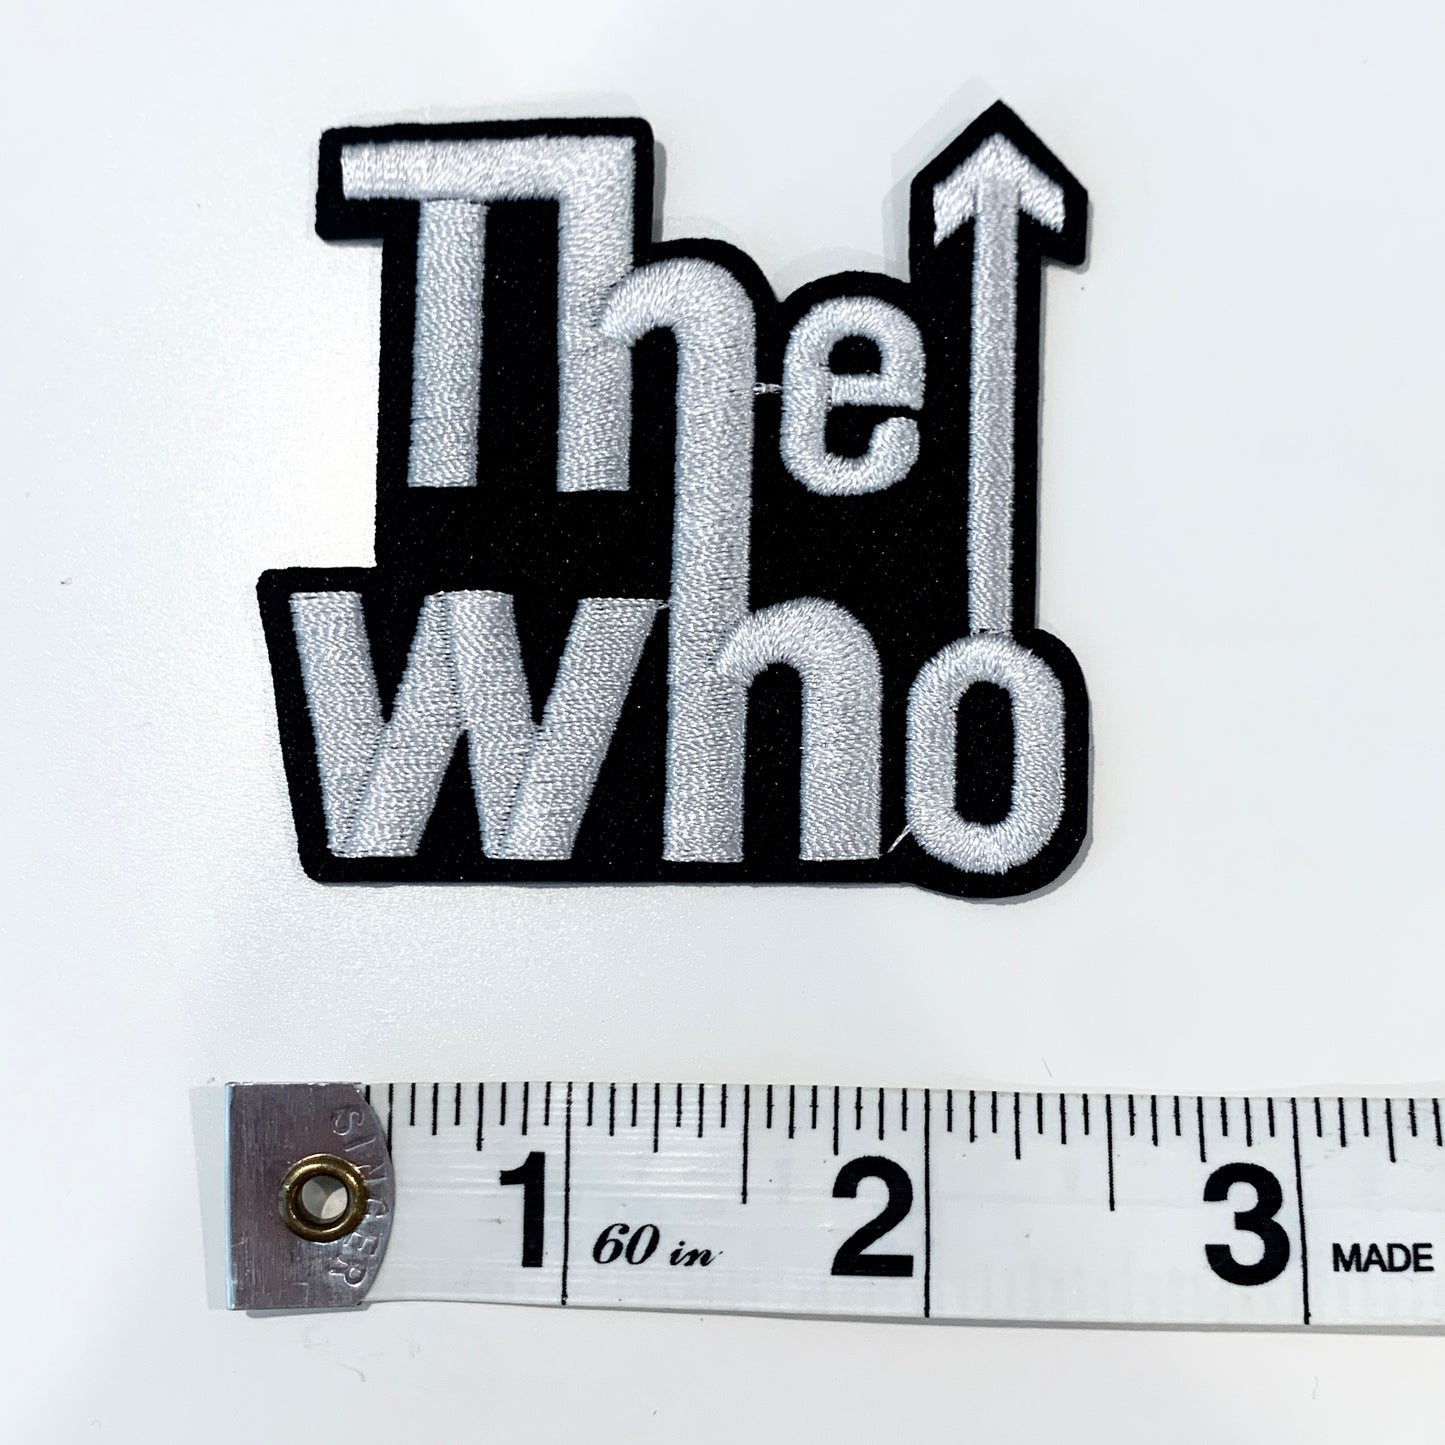 THE WHO Patch